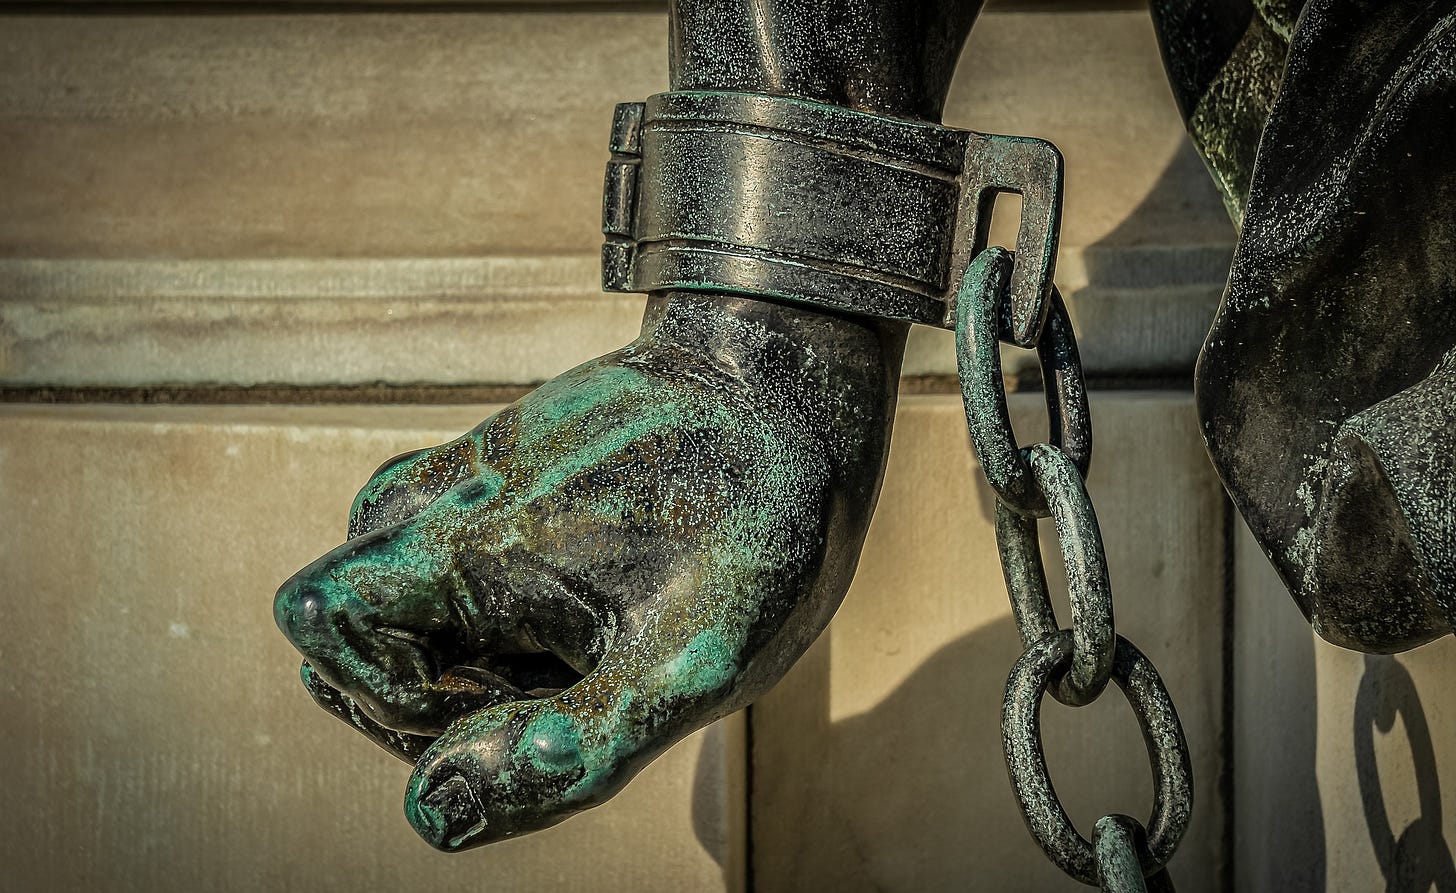 Image of statute, closeup of hand, in cuff and chains.